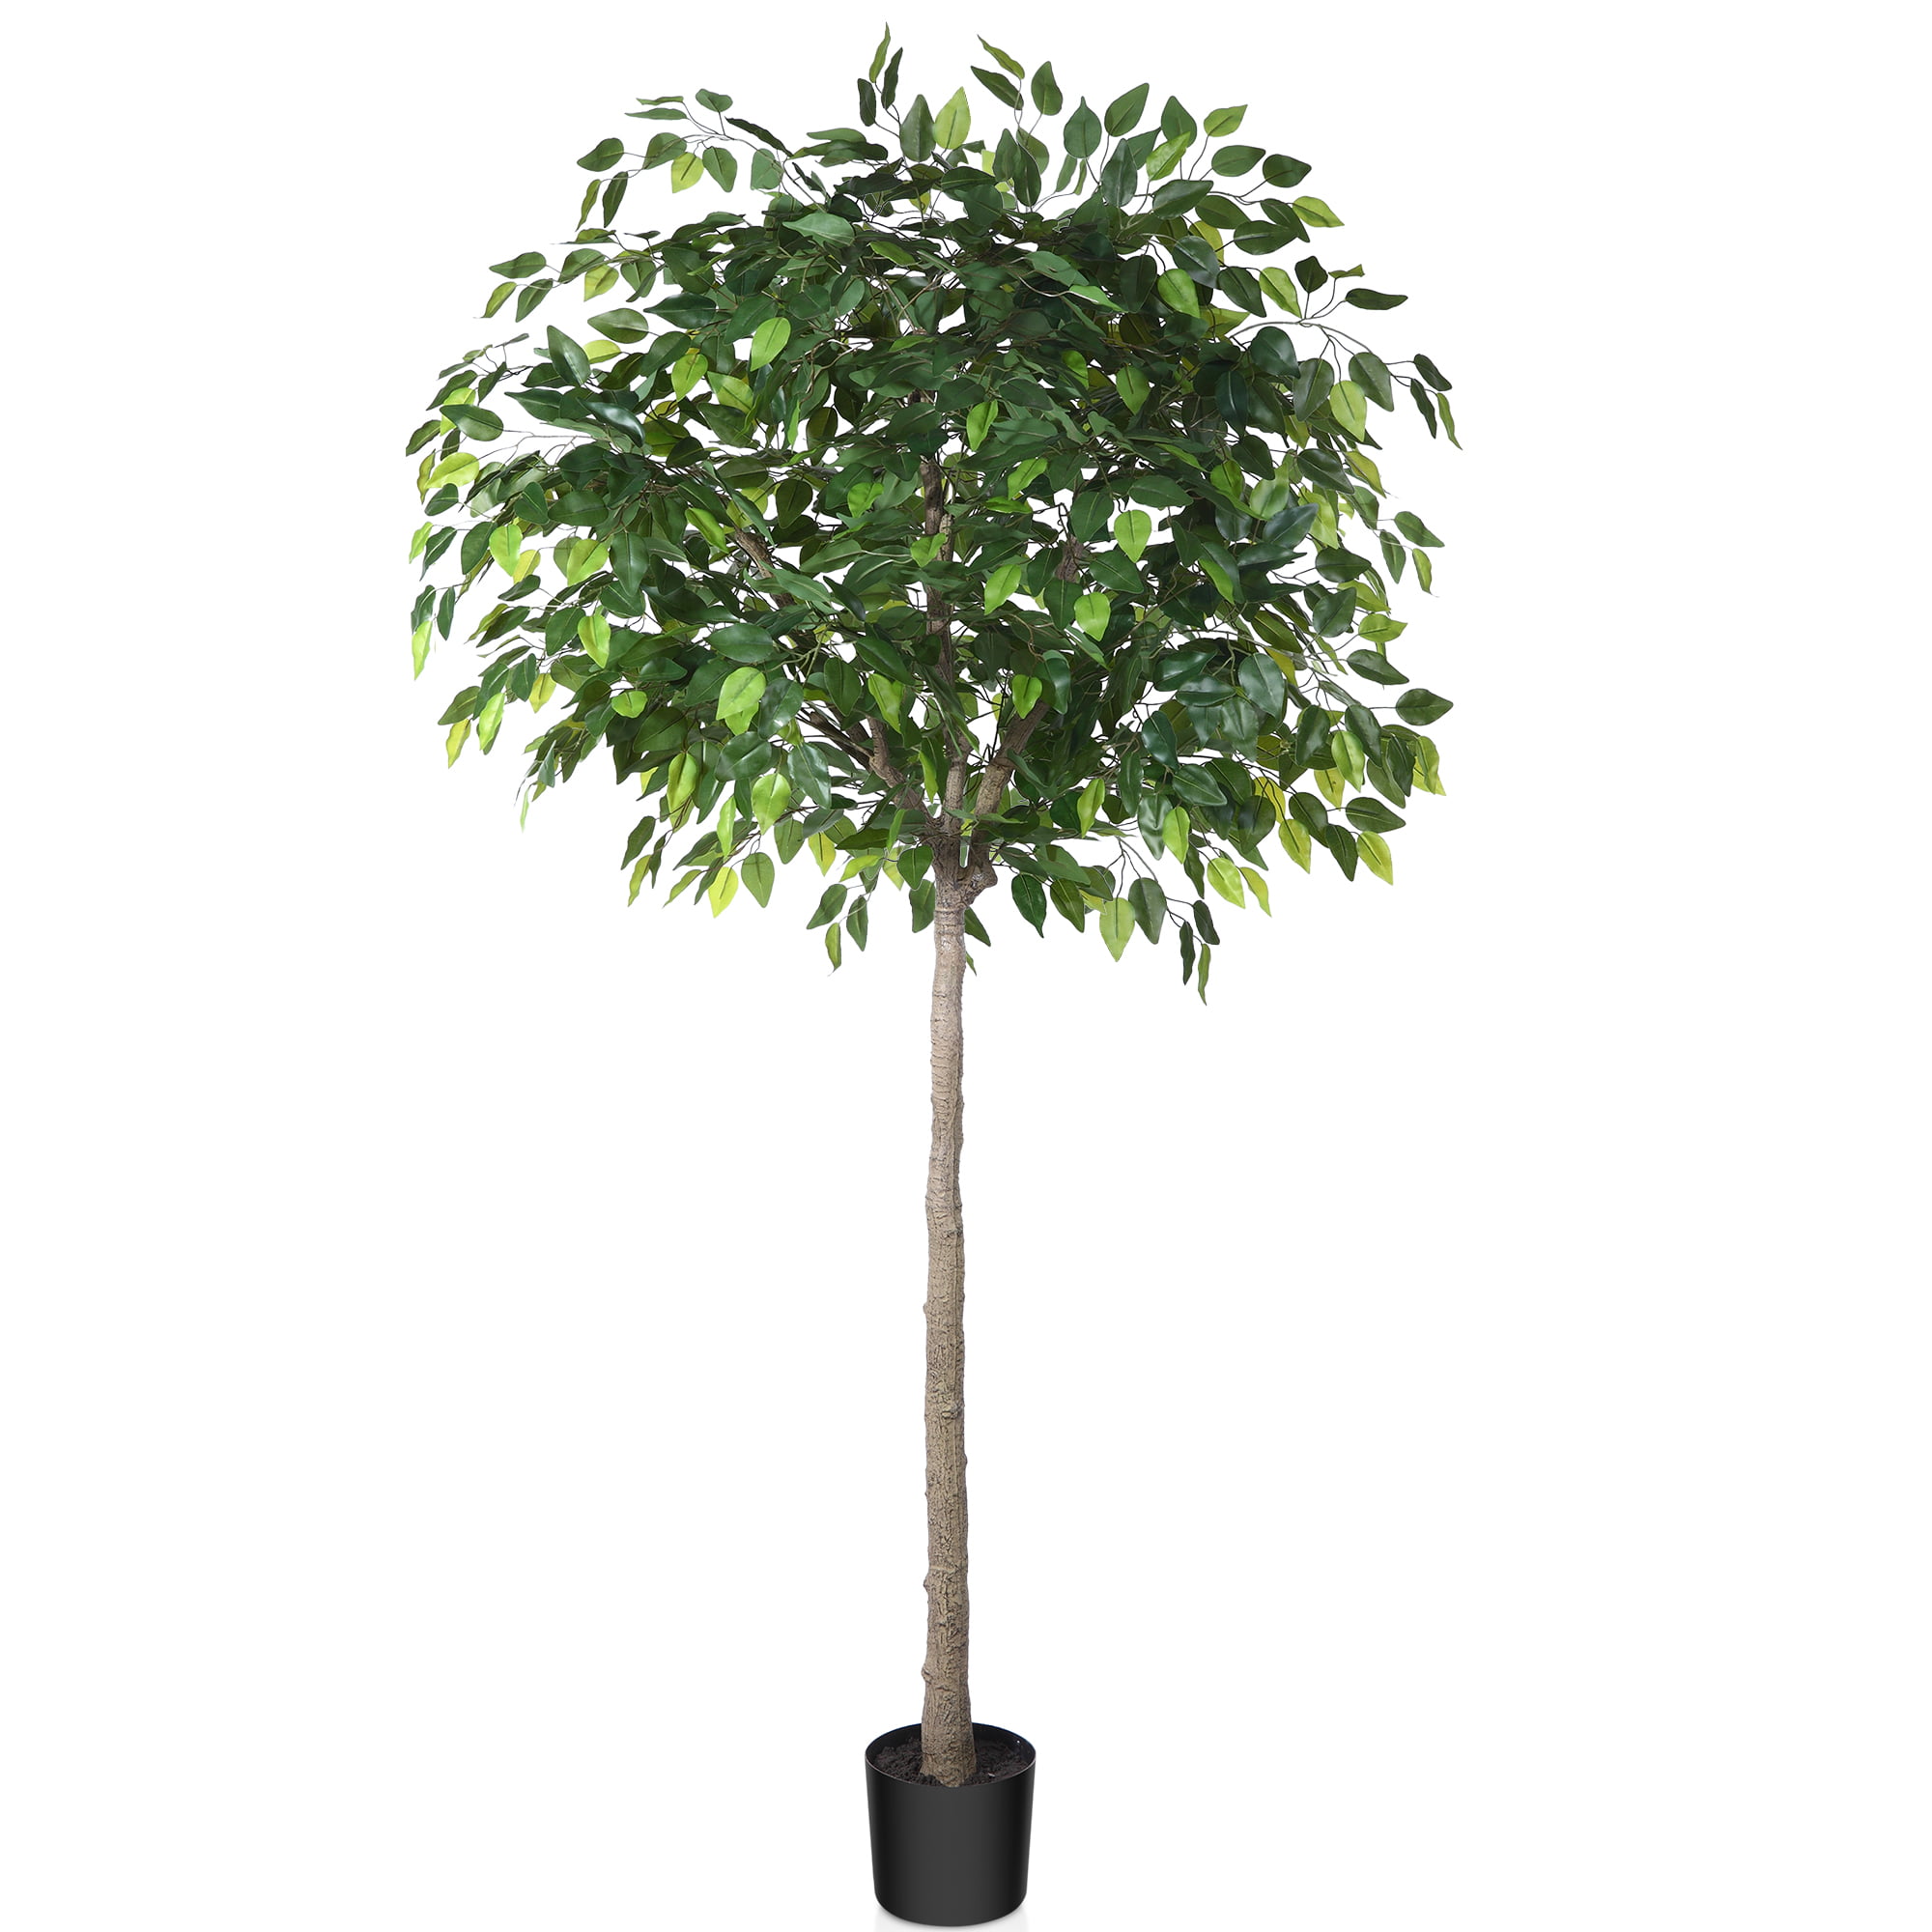 2 Pack Artificial Ficus Silk Tree, 5 FT Faux Plastic Ficus Plant in Pot with Durable Plastic Trunk, Fake for Home Decor Office House Living Room Indoor Outdoor - Walmart.com